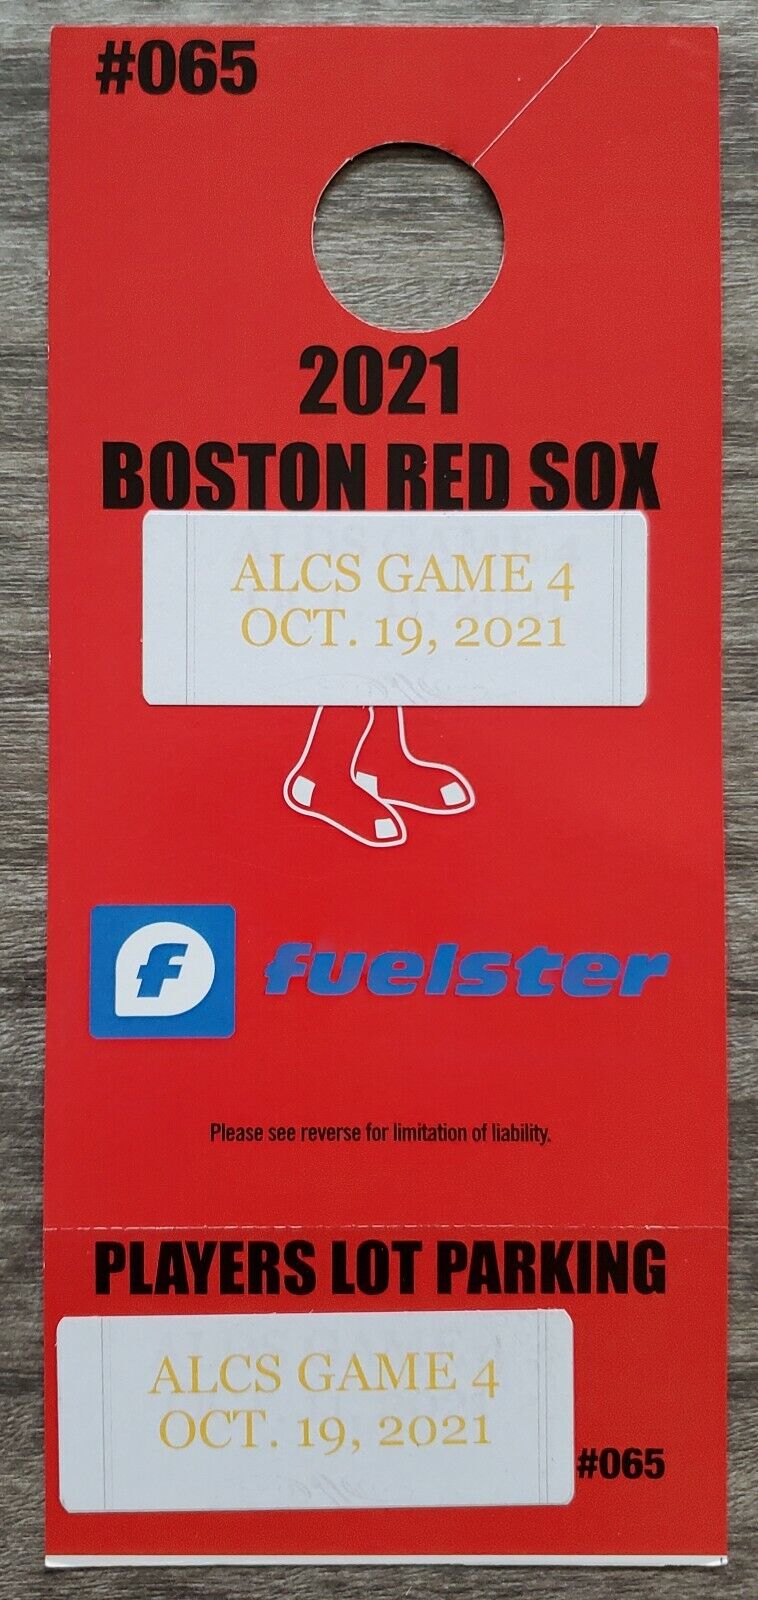 Boston Red Sox Vs Astros ALCS Game 4 Fenway Park Players Parking Ticket 10/19/21 eBay